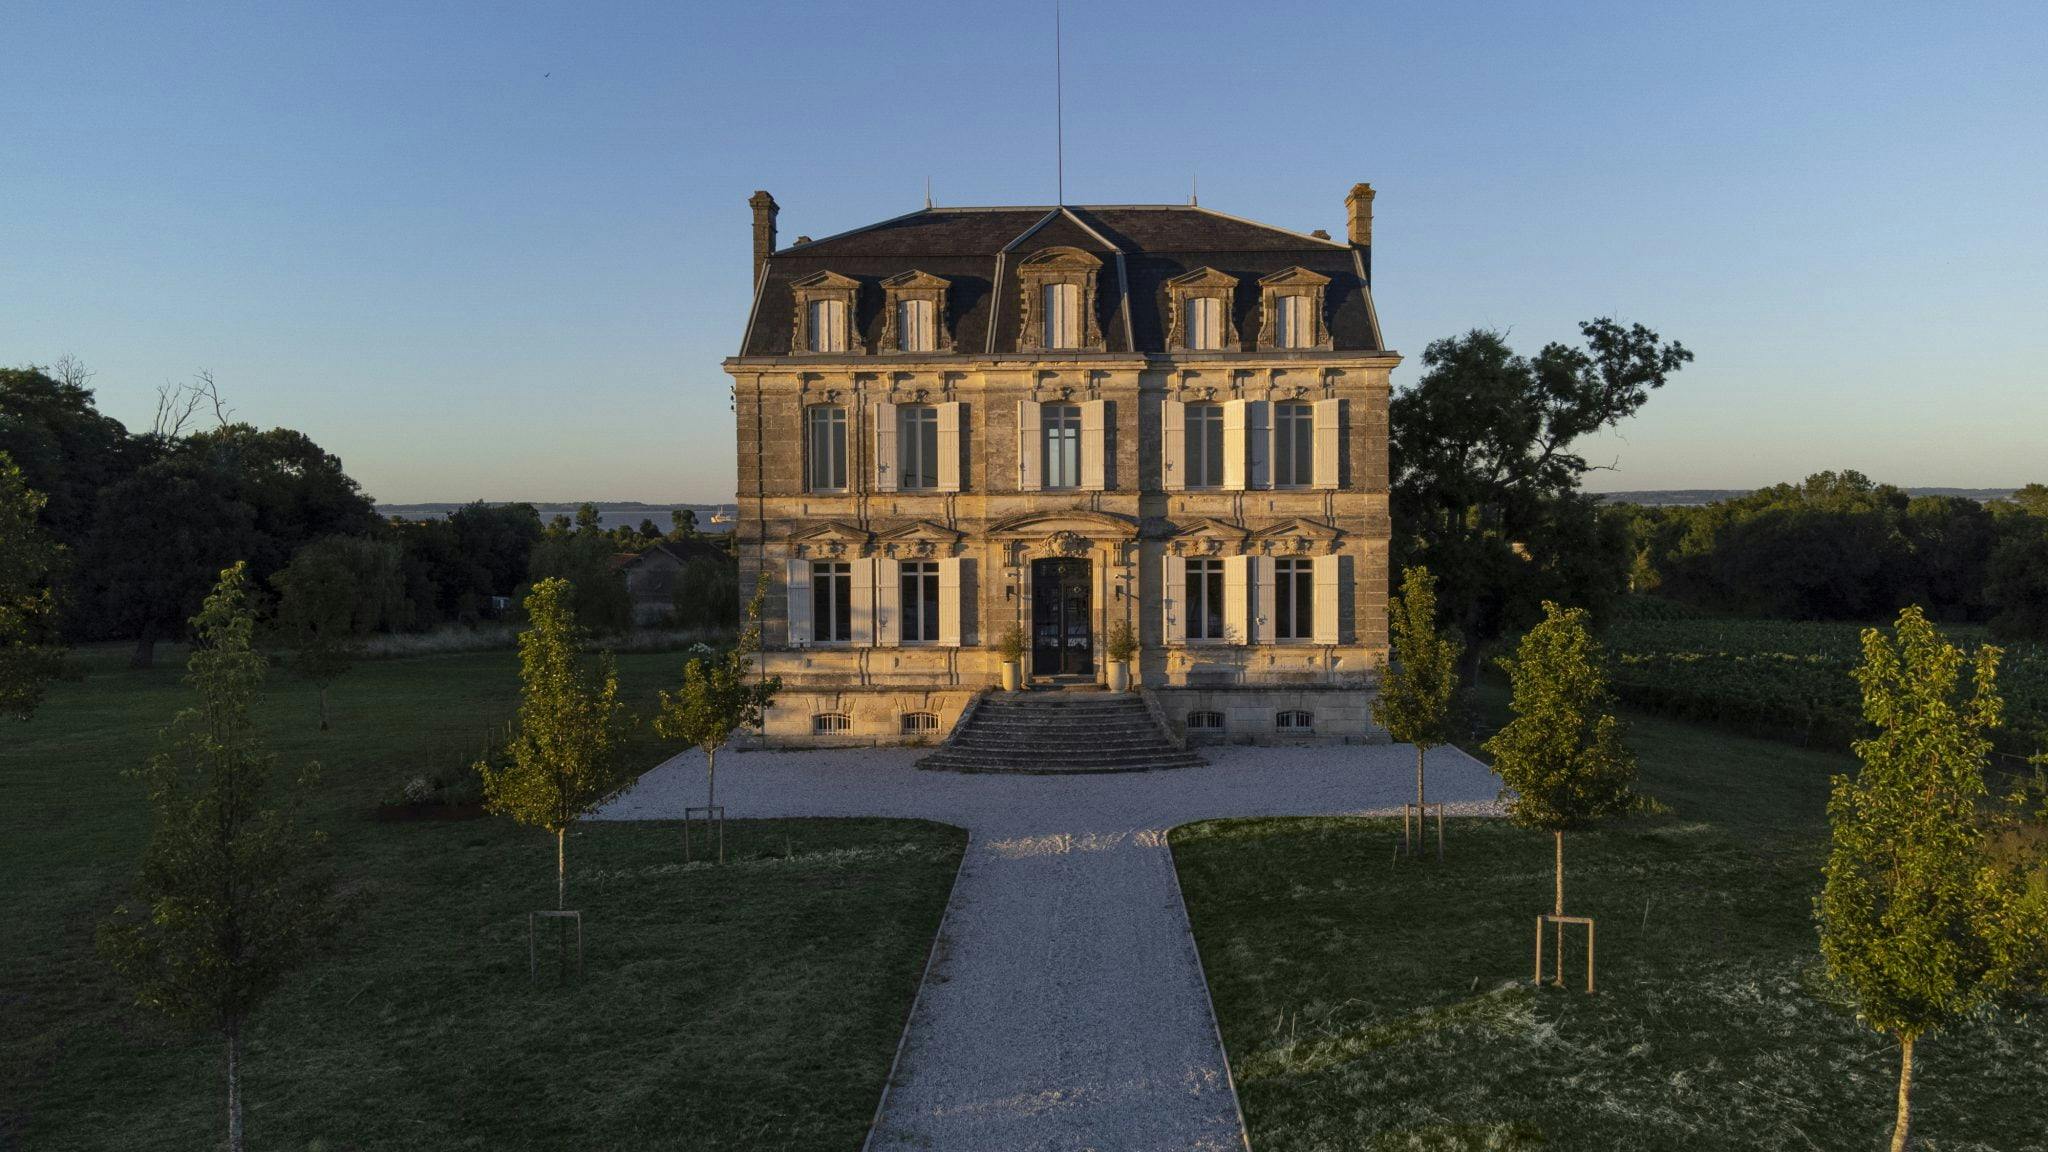 View of the château at sunset